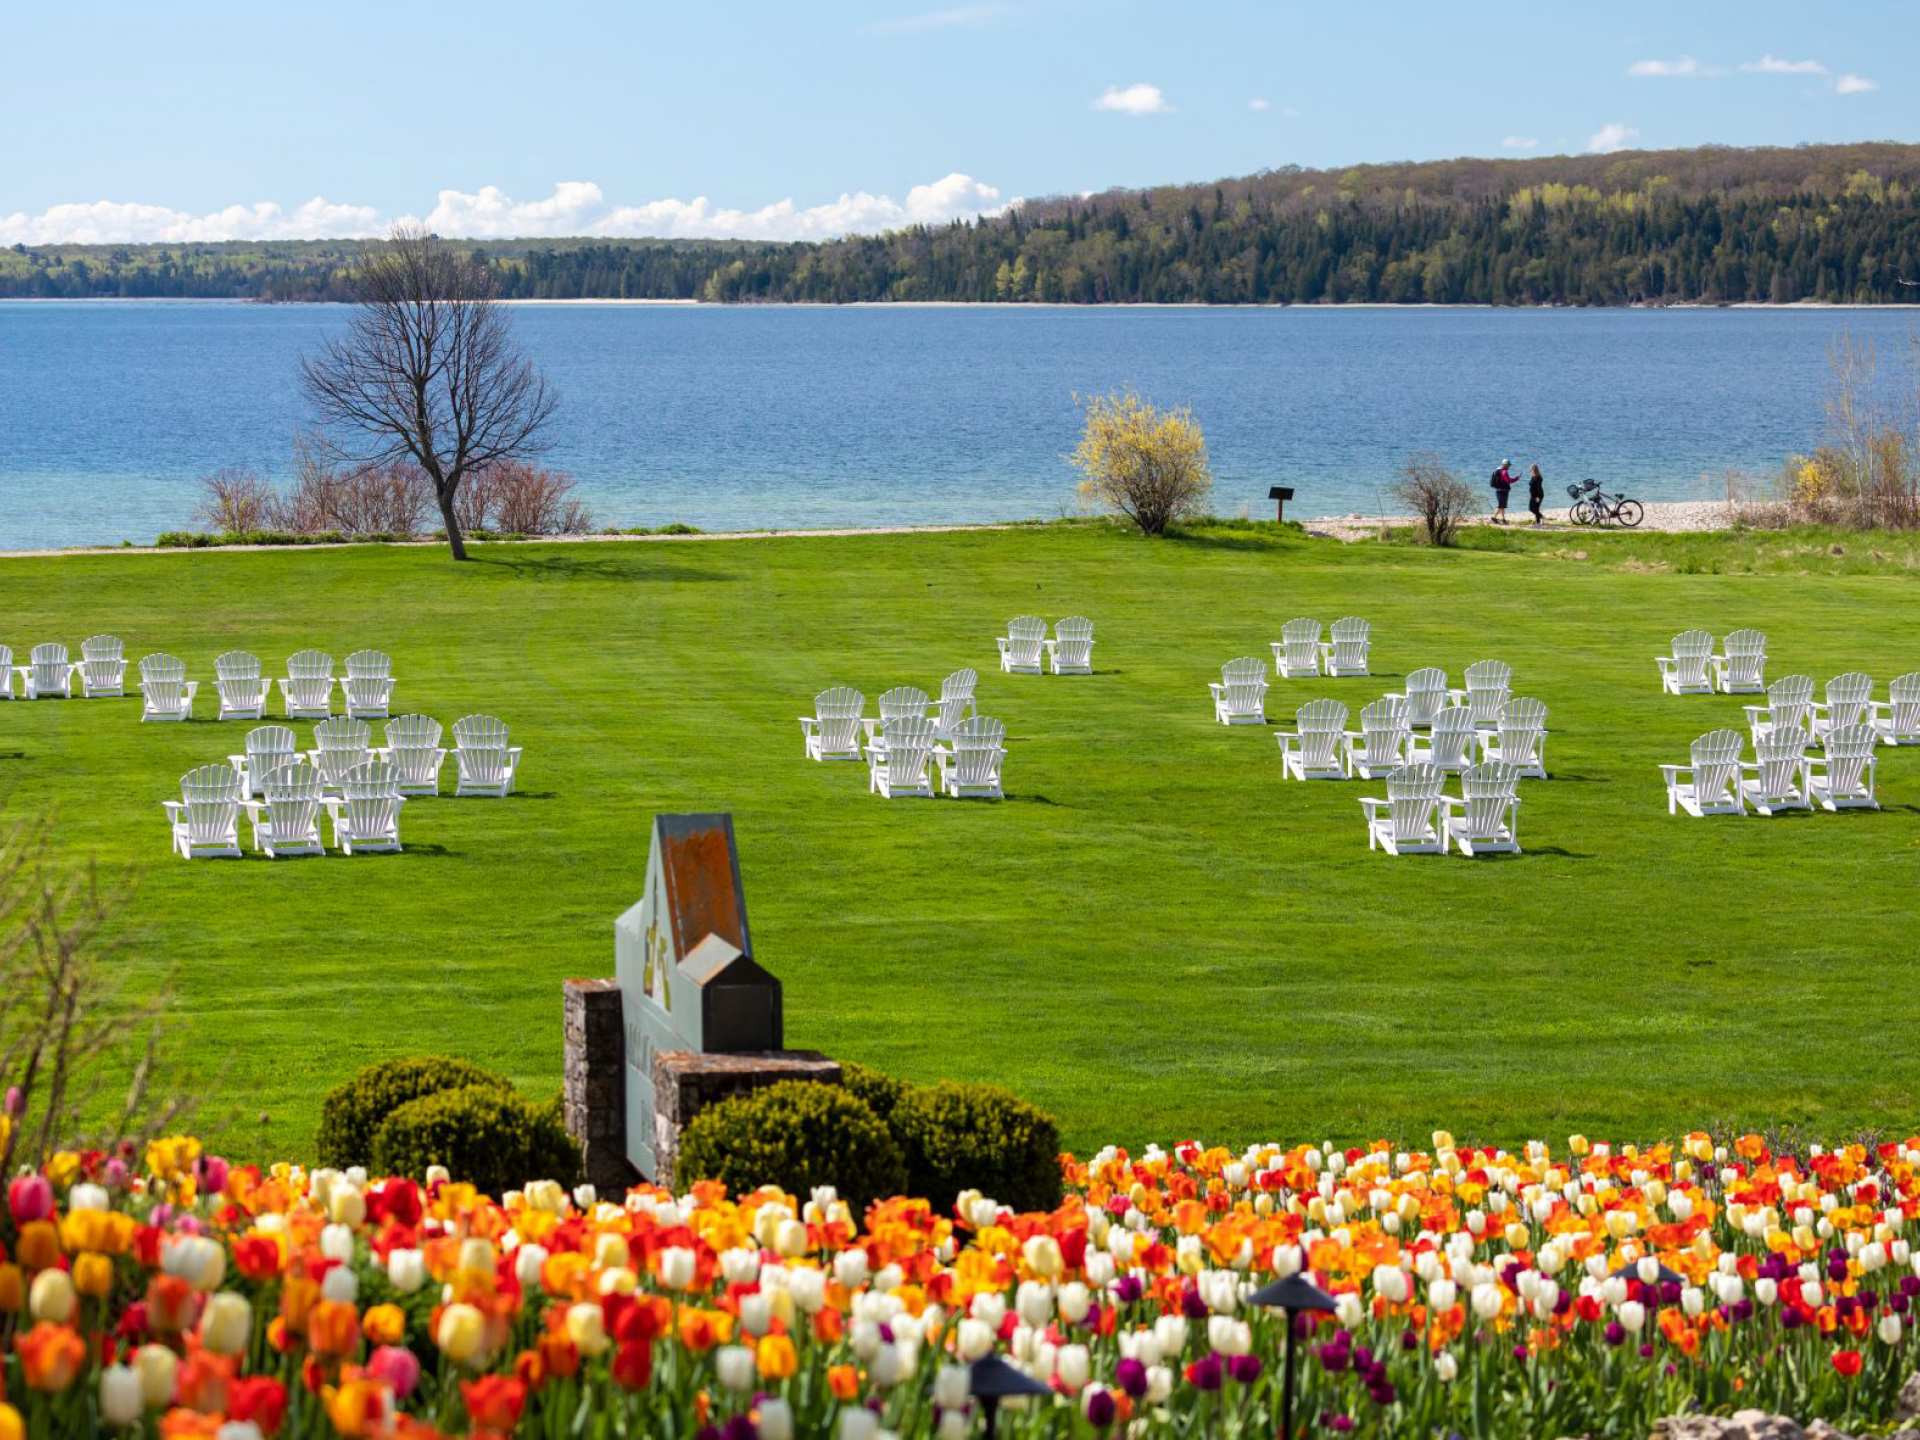 Mackinac Island | The tulips and the great lawn looking out on Lake Huron